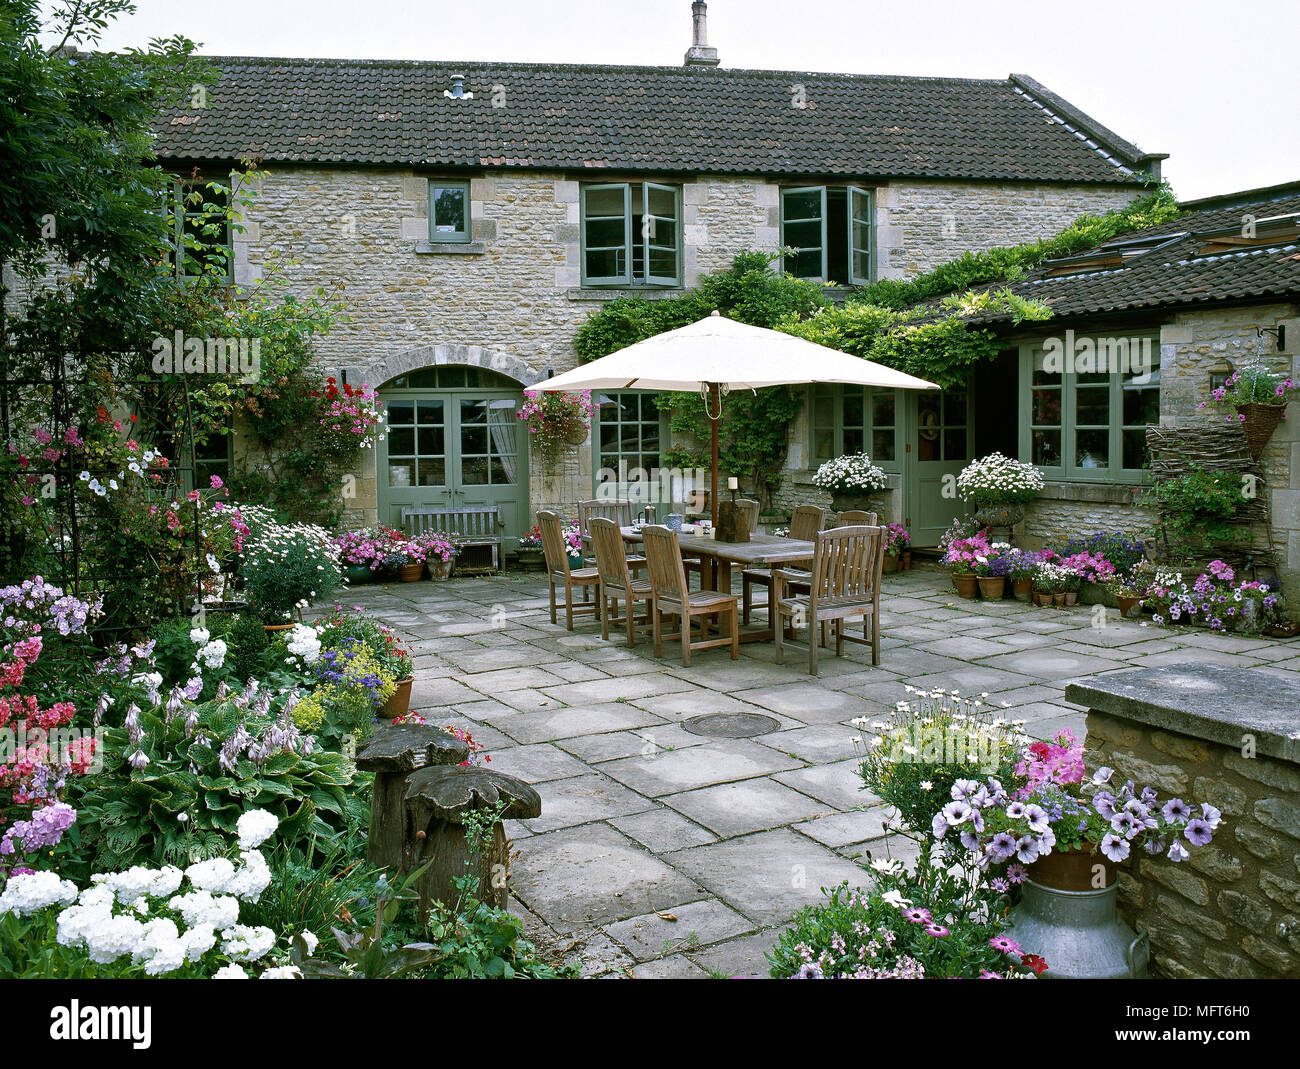 Exterior of the back terrace of a stone country house with tile floor, potted flowers, and an outdoor dining table and chairs. Stock Photo